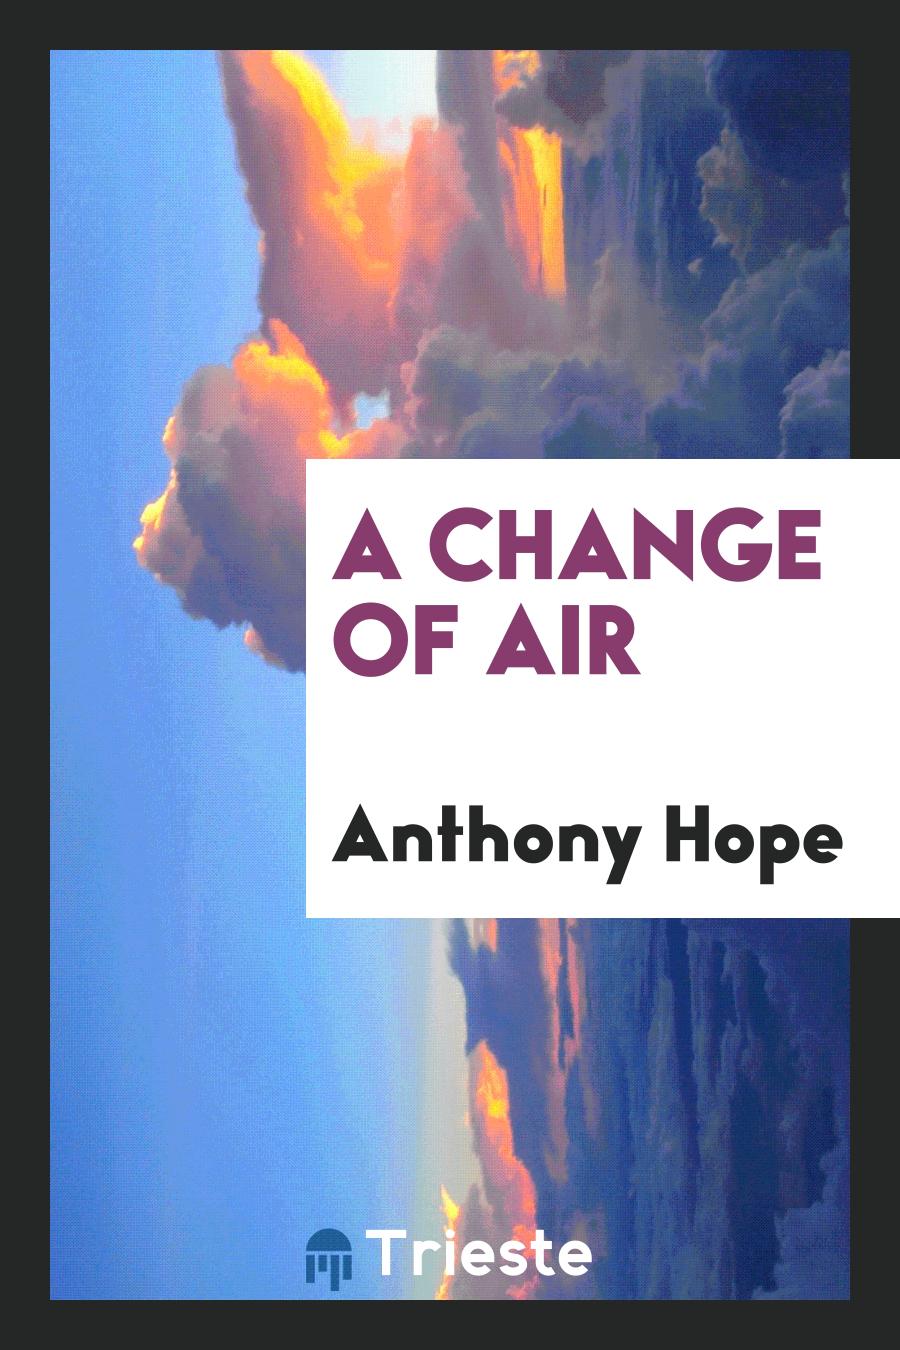 A change of air